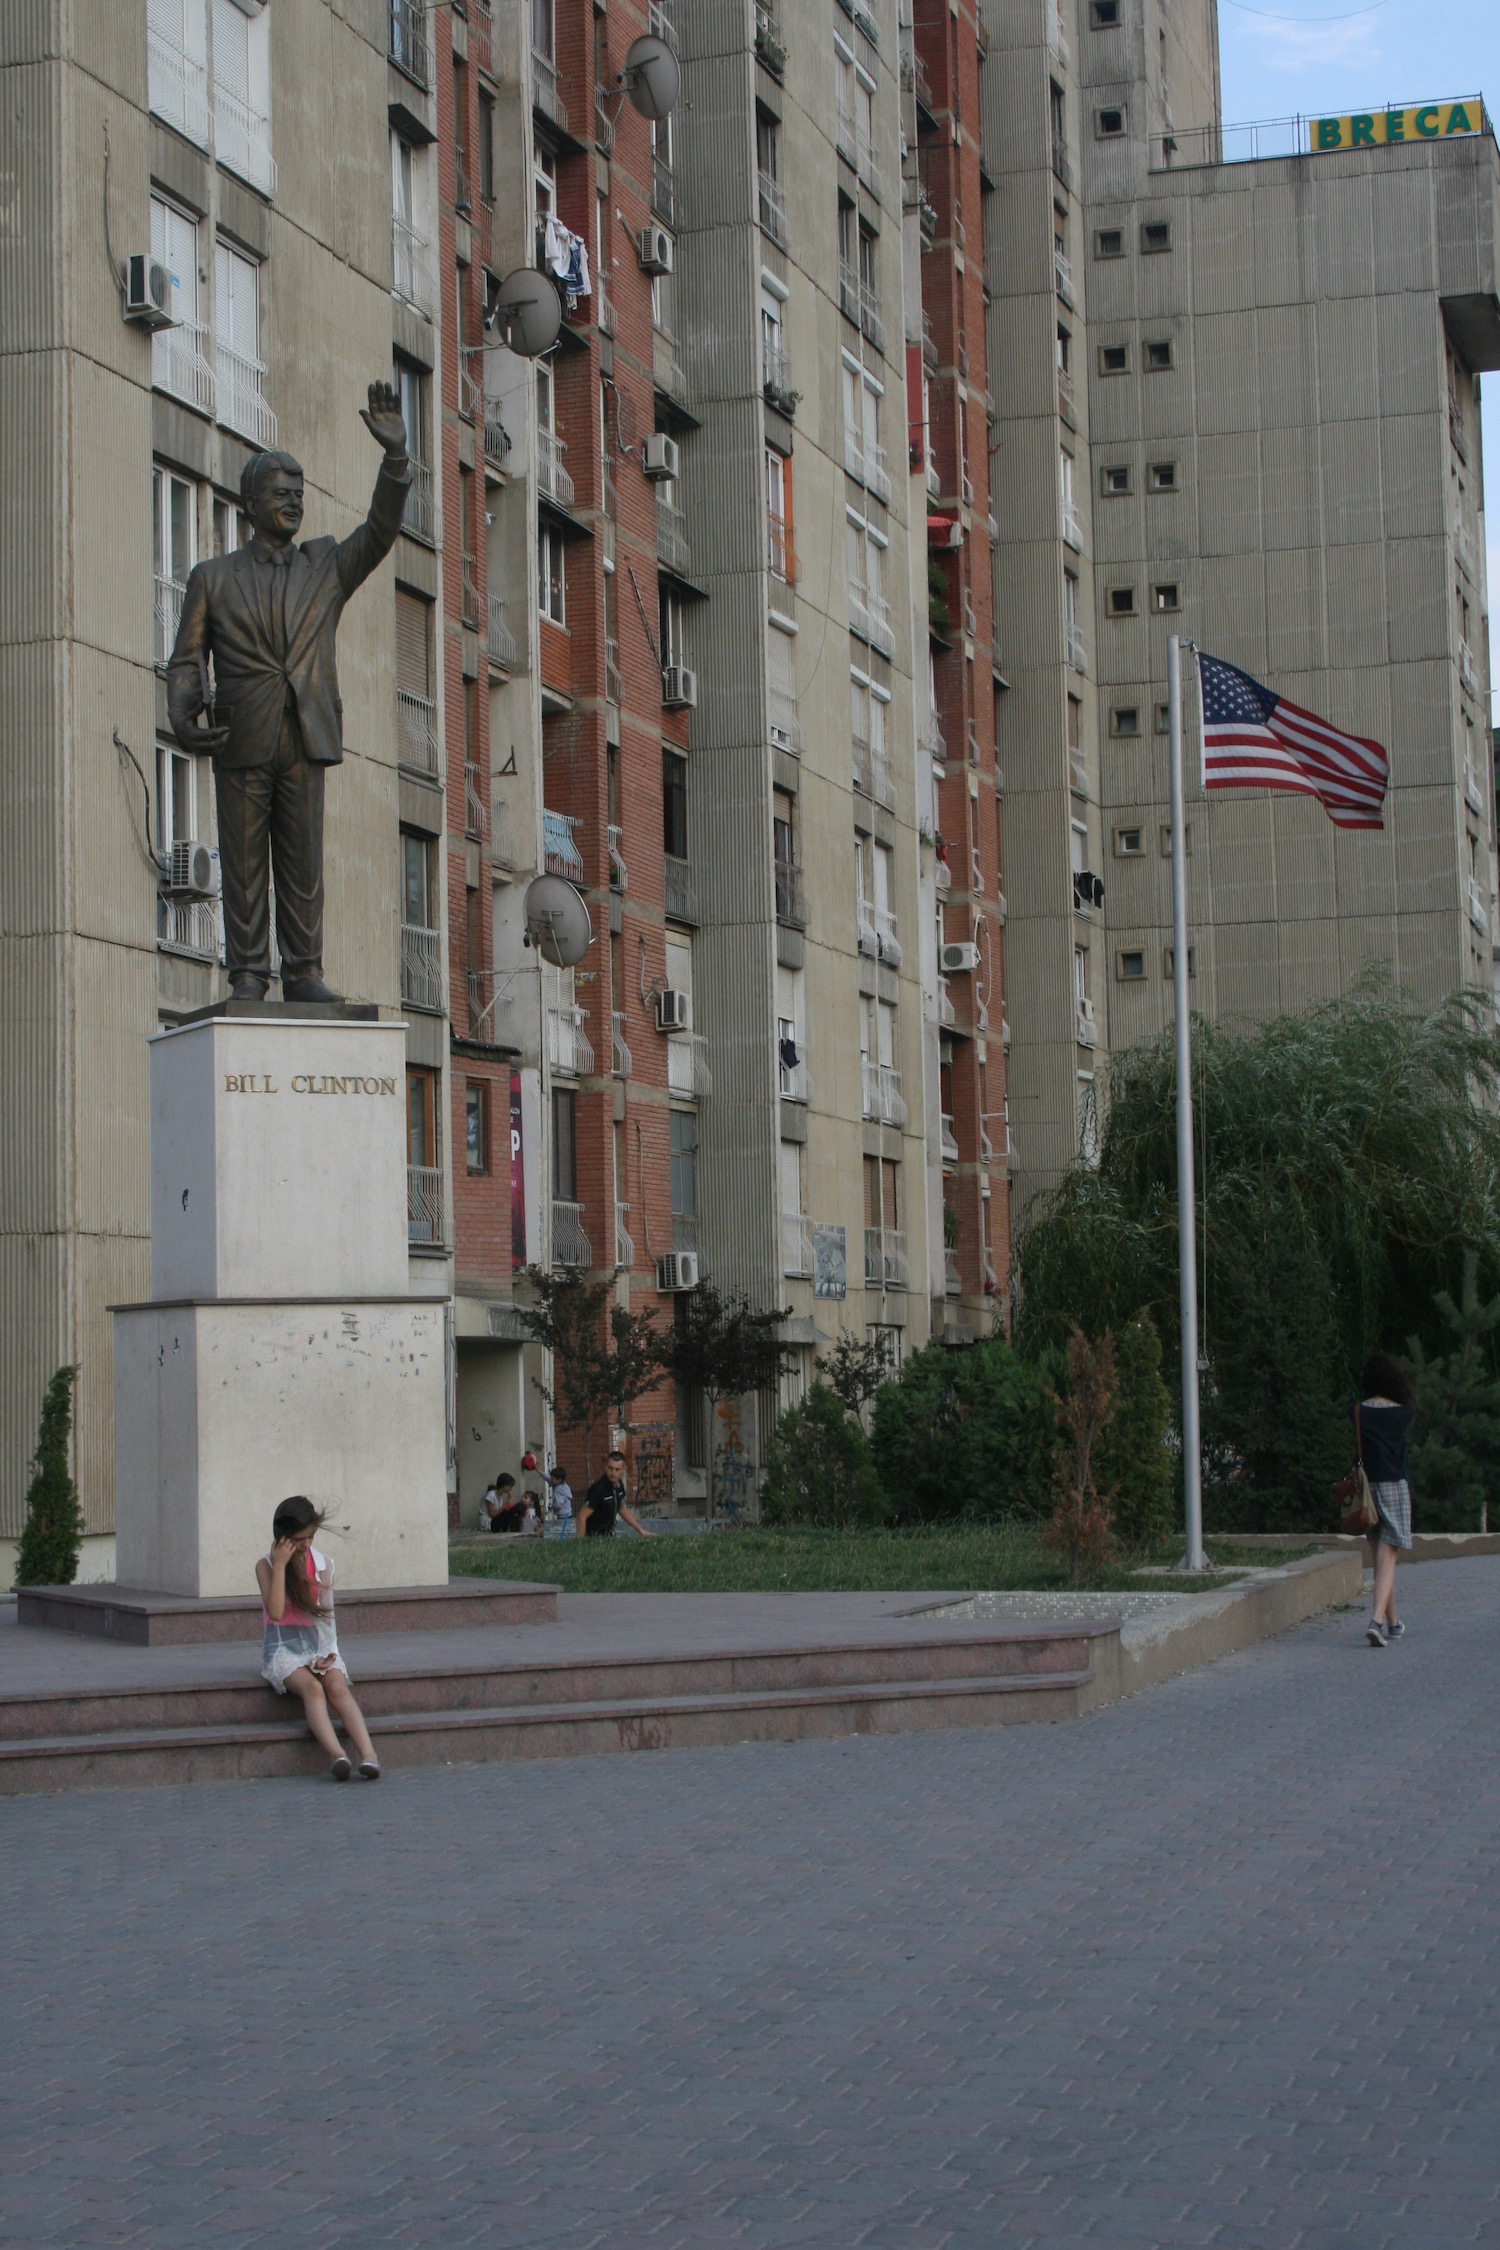 a statue of a man with a flag in front of a building